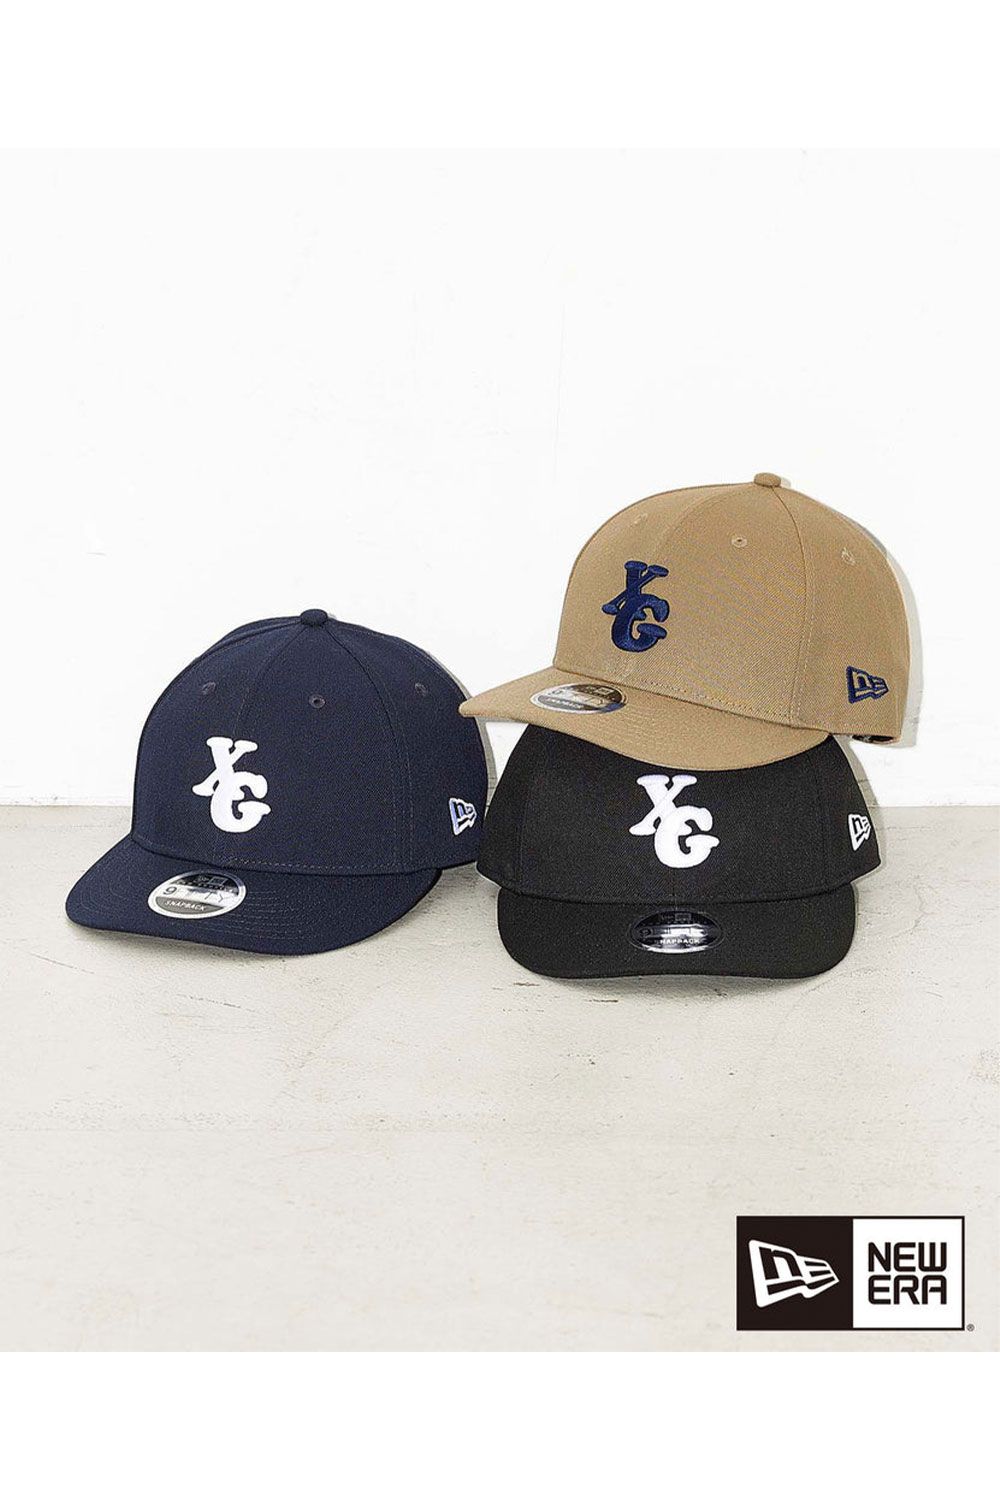 X-girl × NEW ERA Low Profile 9FIFTY™ CAP - ONE SIZE - ブラック